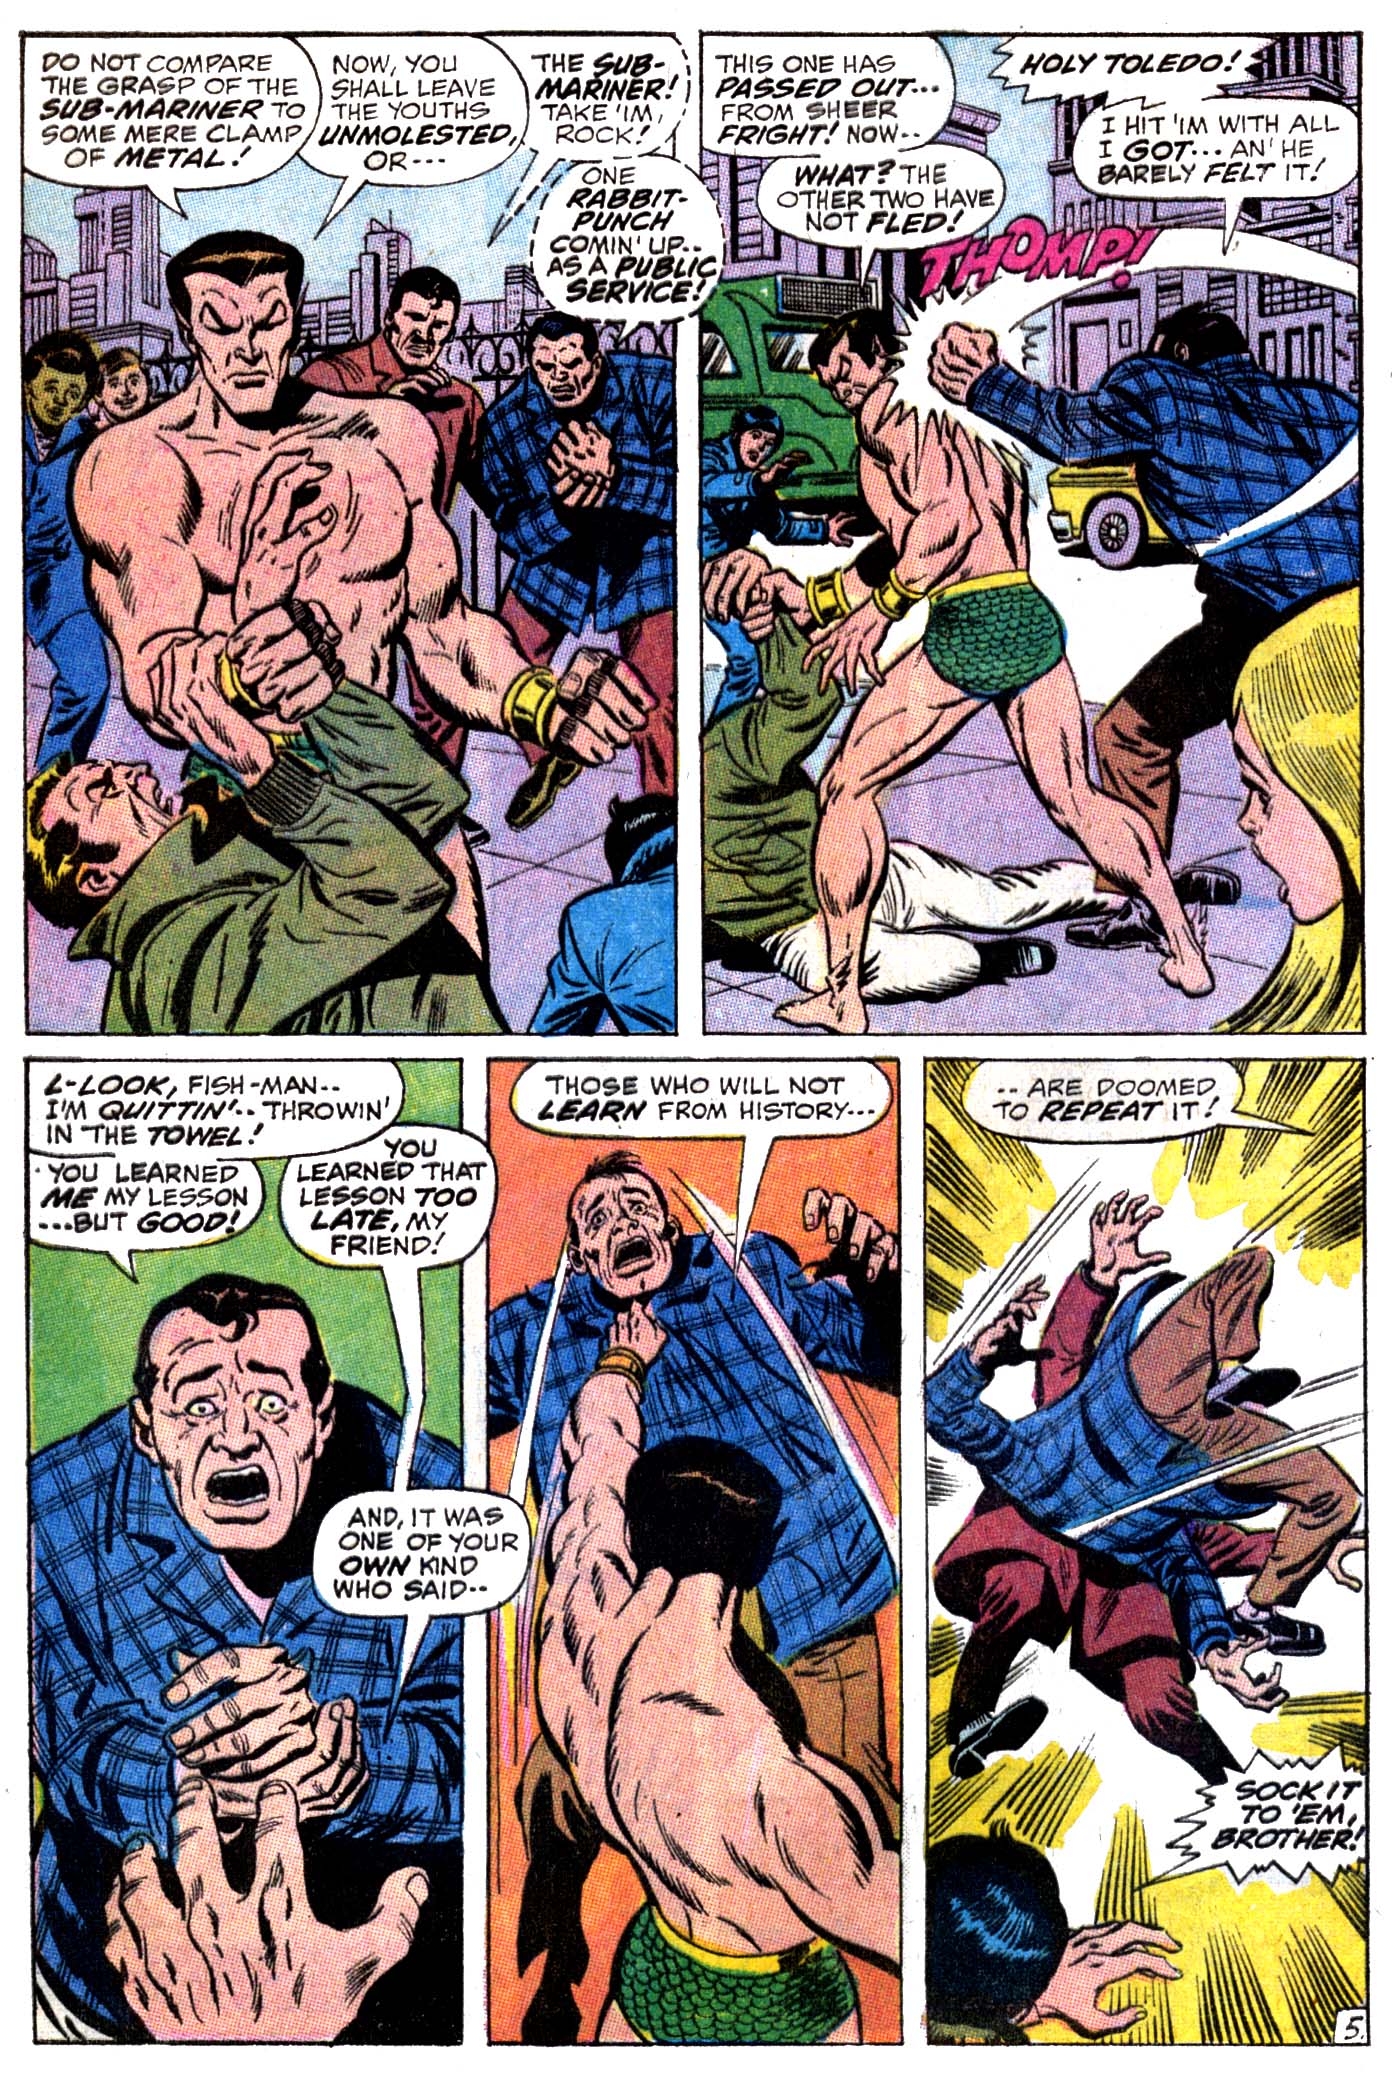 Read online The Sub-Mariner comic -  Issue #28 - 6